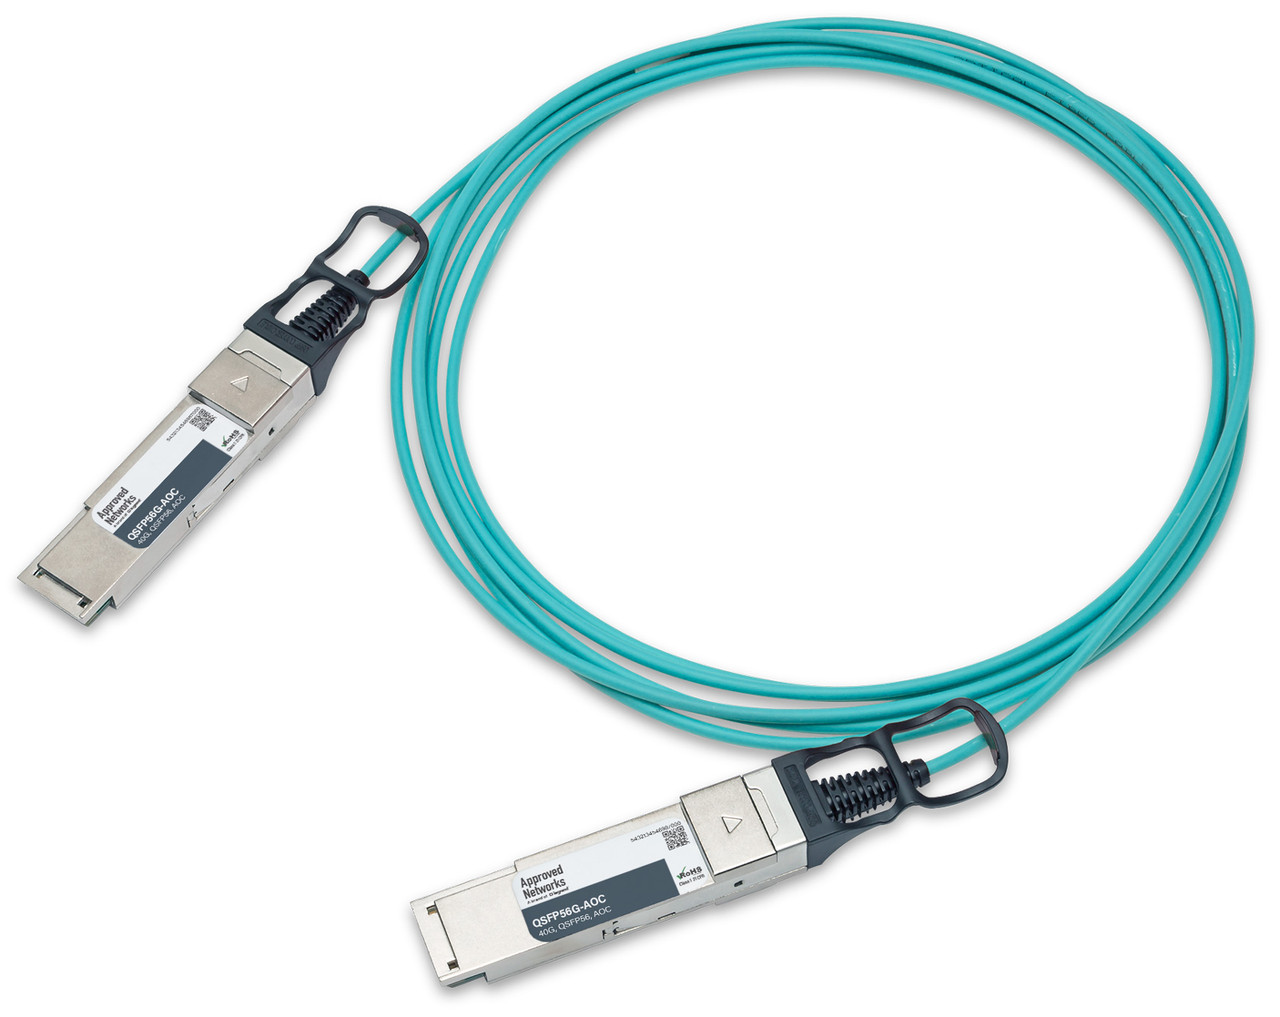 56G QSFP+ InfiniBand Active Optical Cable (AOC)